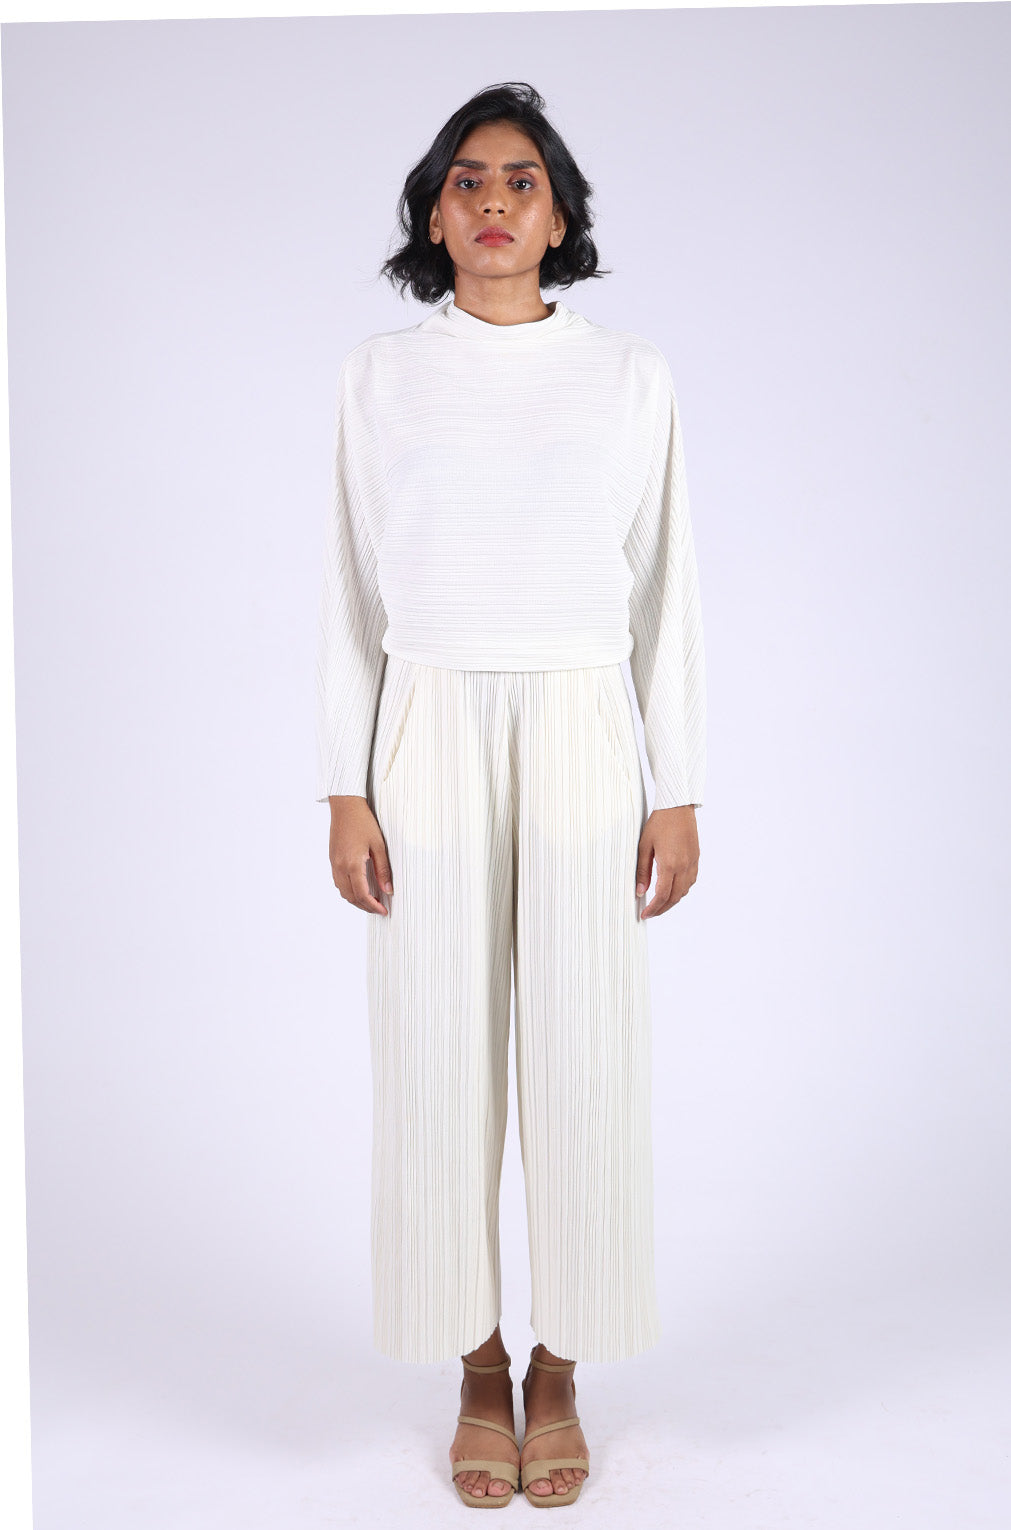 White Pleated Top & Matching Pleated Pants